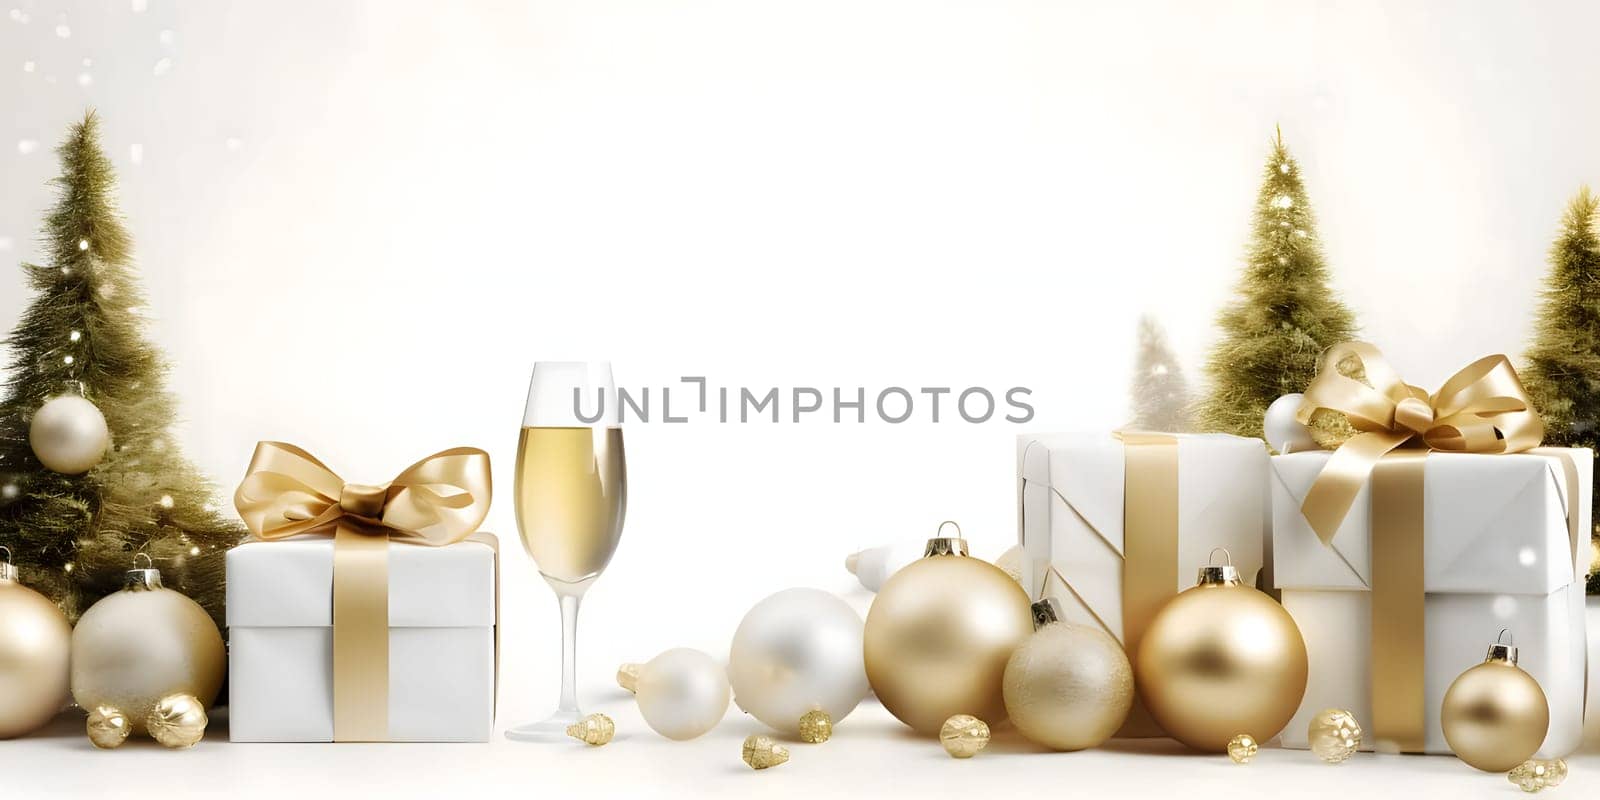 Christmas trees with gold baubles, gifts with gold bows, champagne bottle and glass. Bright background, banner with space for your own content. Blank space for the inscription.